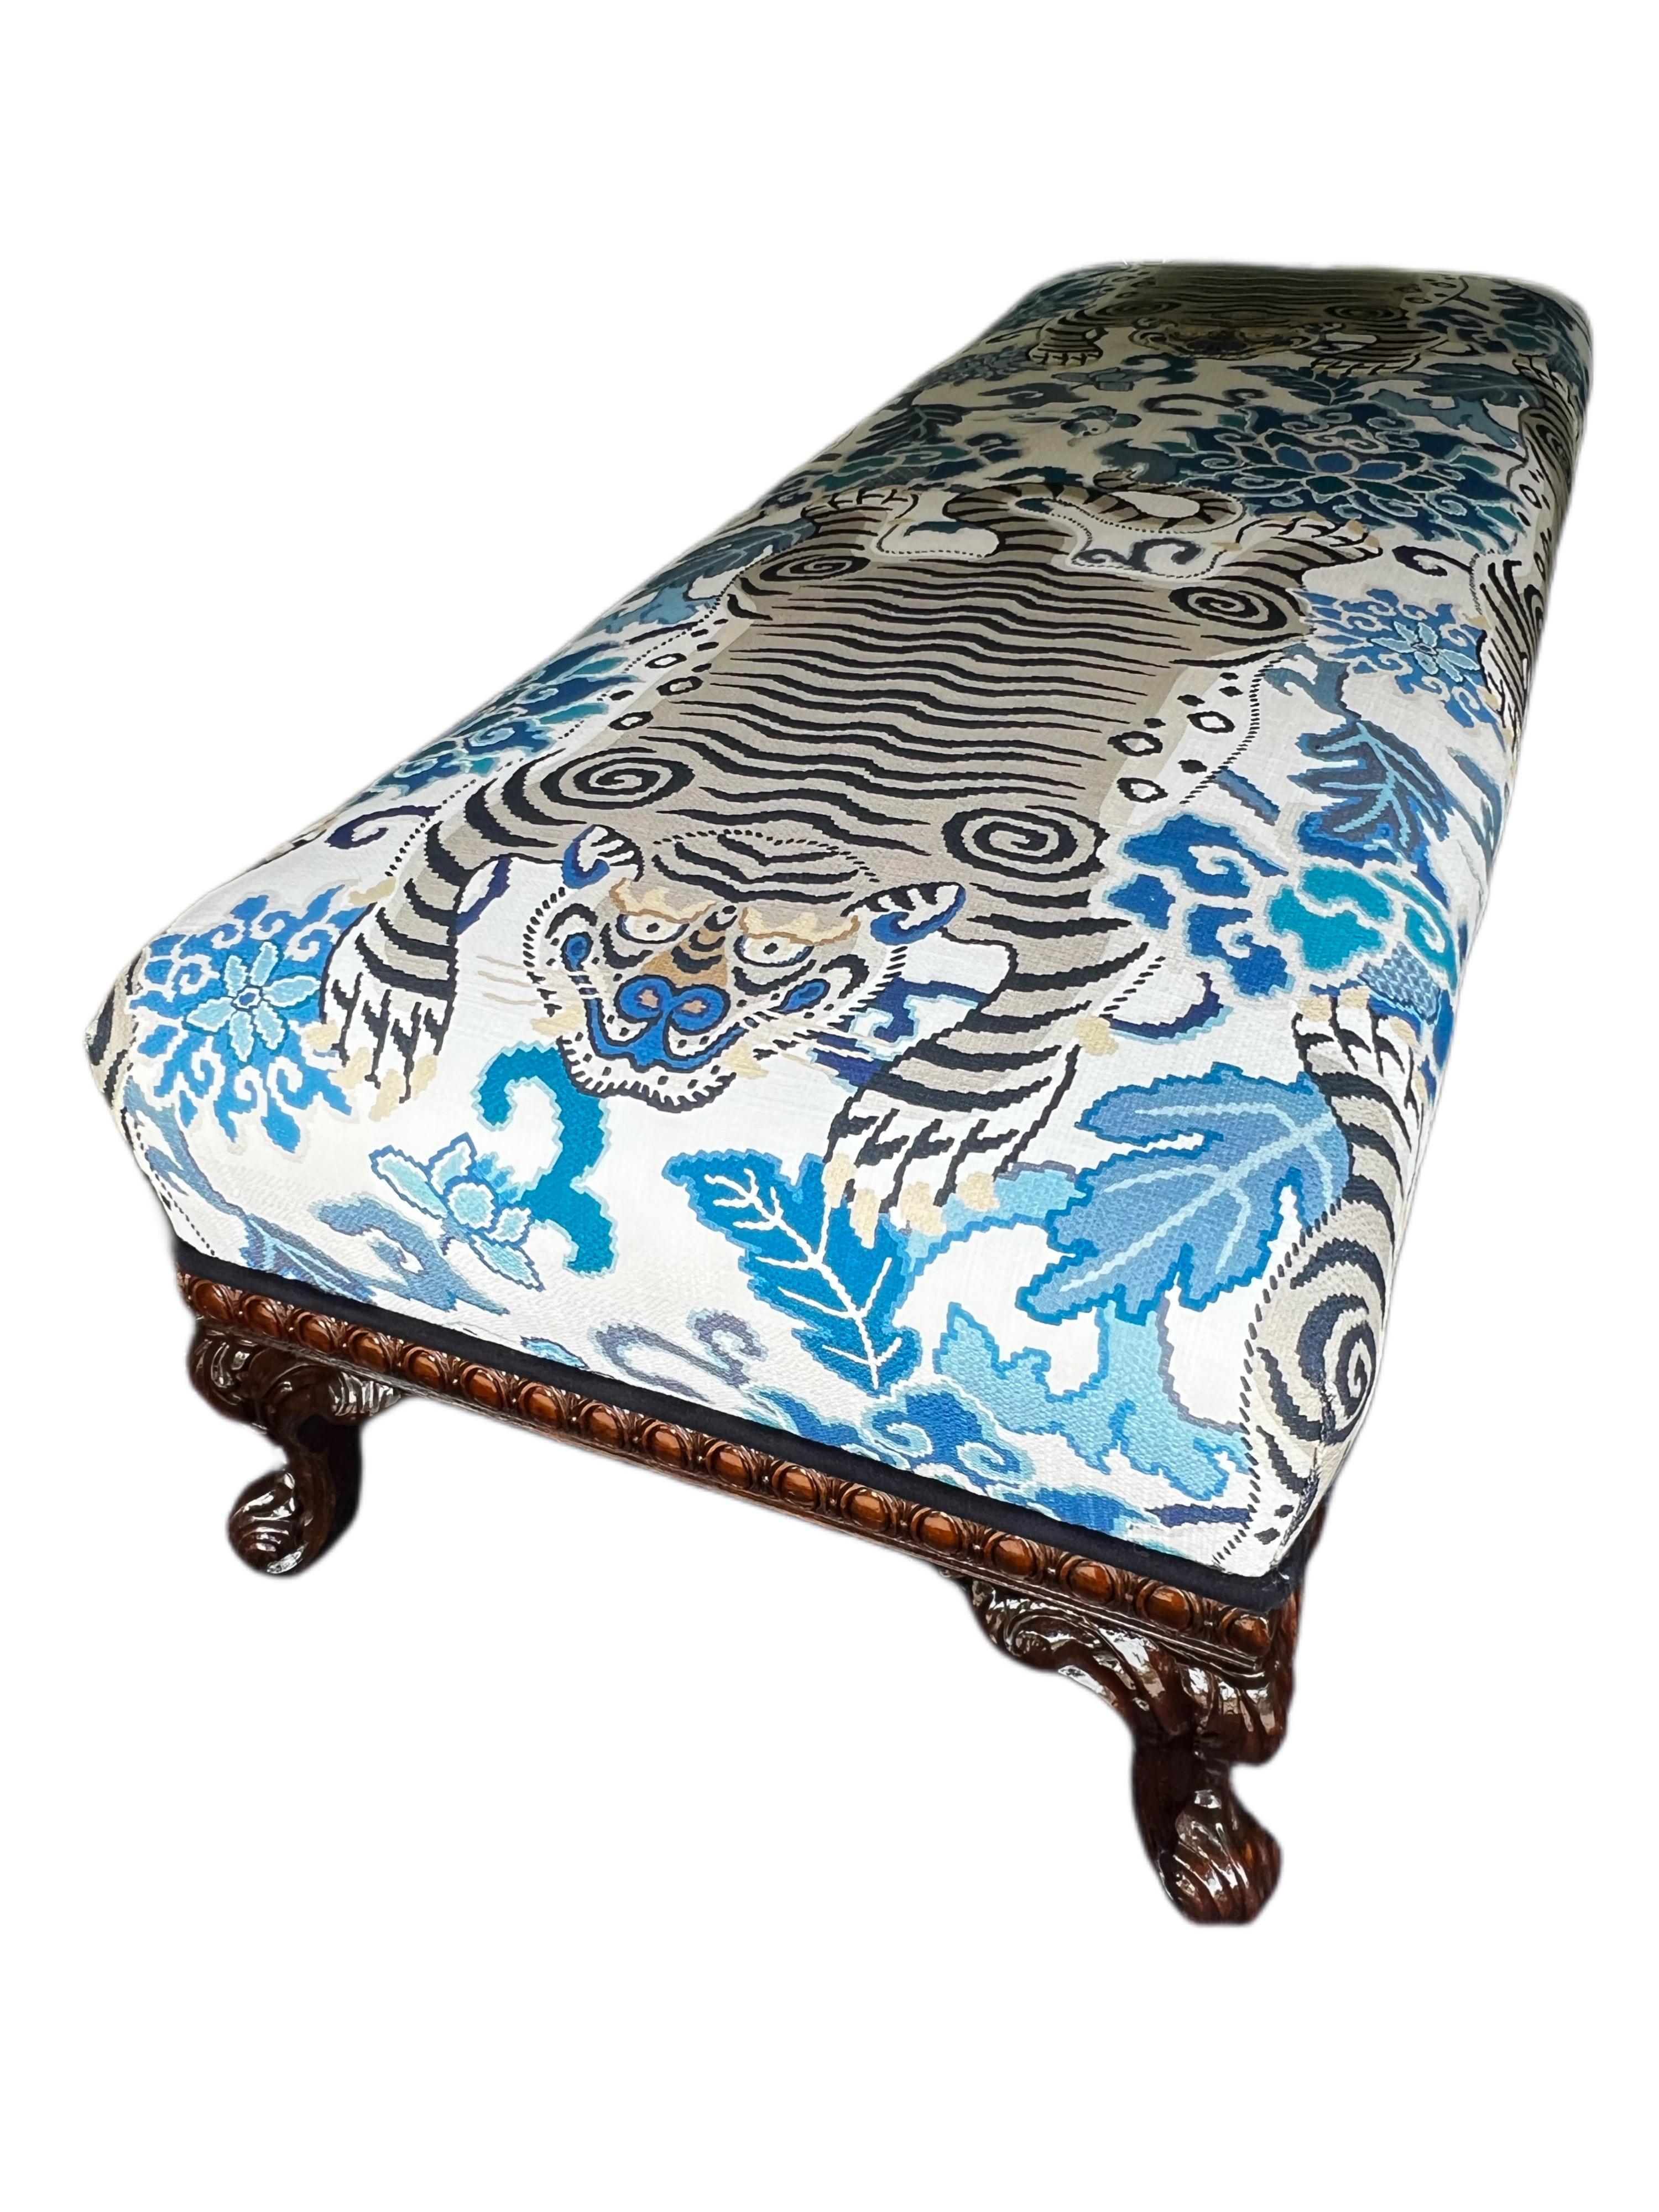 Stunning vintage bench fully refurbished, brand new upholstery with bright shades of blue and turquoise over white background. A modern Chinoiserie with tigers that would brighten your room, it’s a large bench that sits low to the ground and would